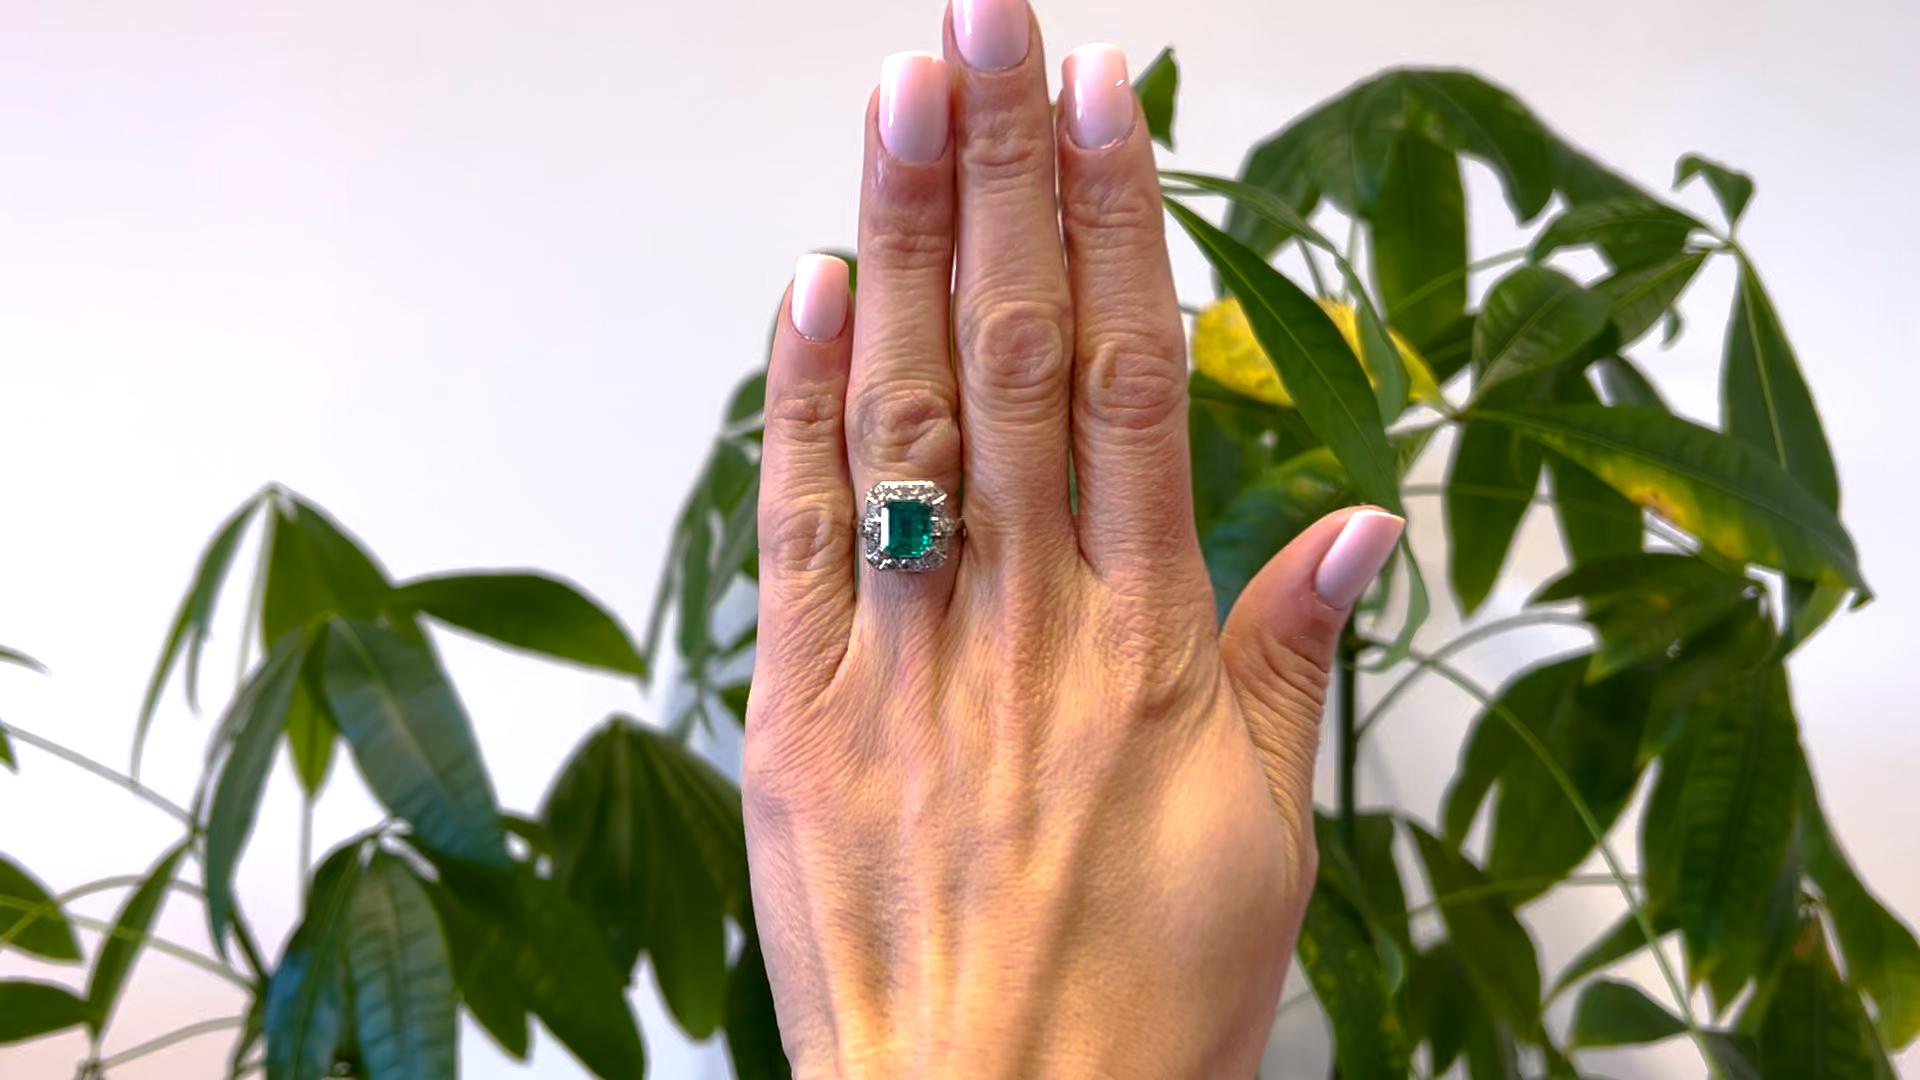 One Art Deco GIA 2.27 Carat Colombian Emerald and Diamond 18k White Gold Halo Ring.  Featuring one octagonal step cut emerald of 2.27 carats, accompanied with GIA #6234089150 stating the emerald is of Colombian origin. Accented by 18 single cut